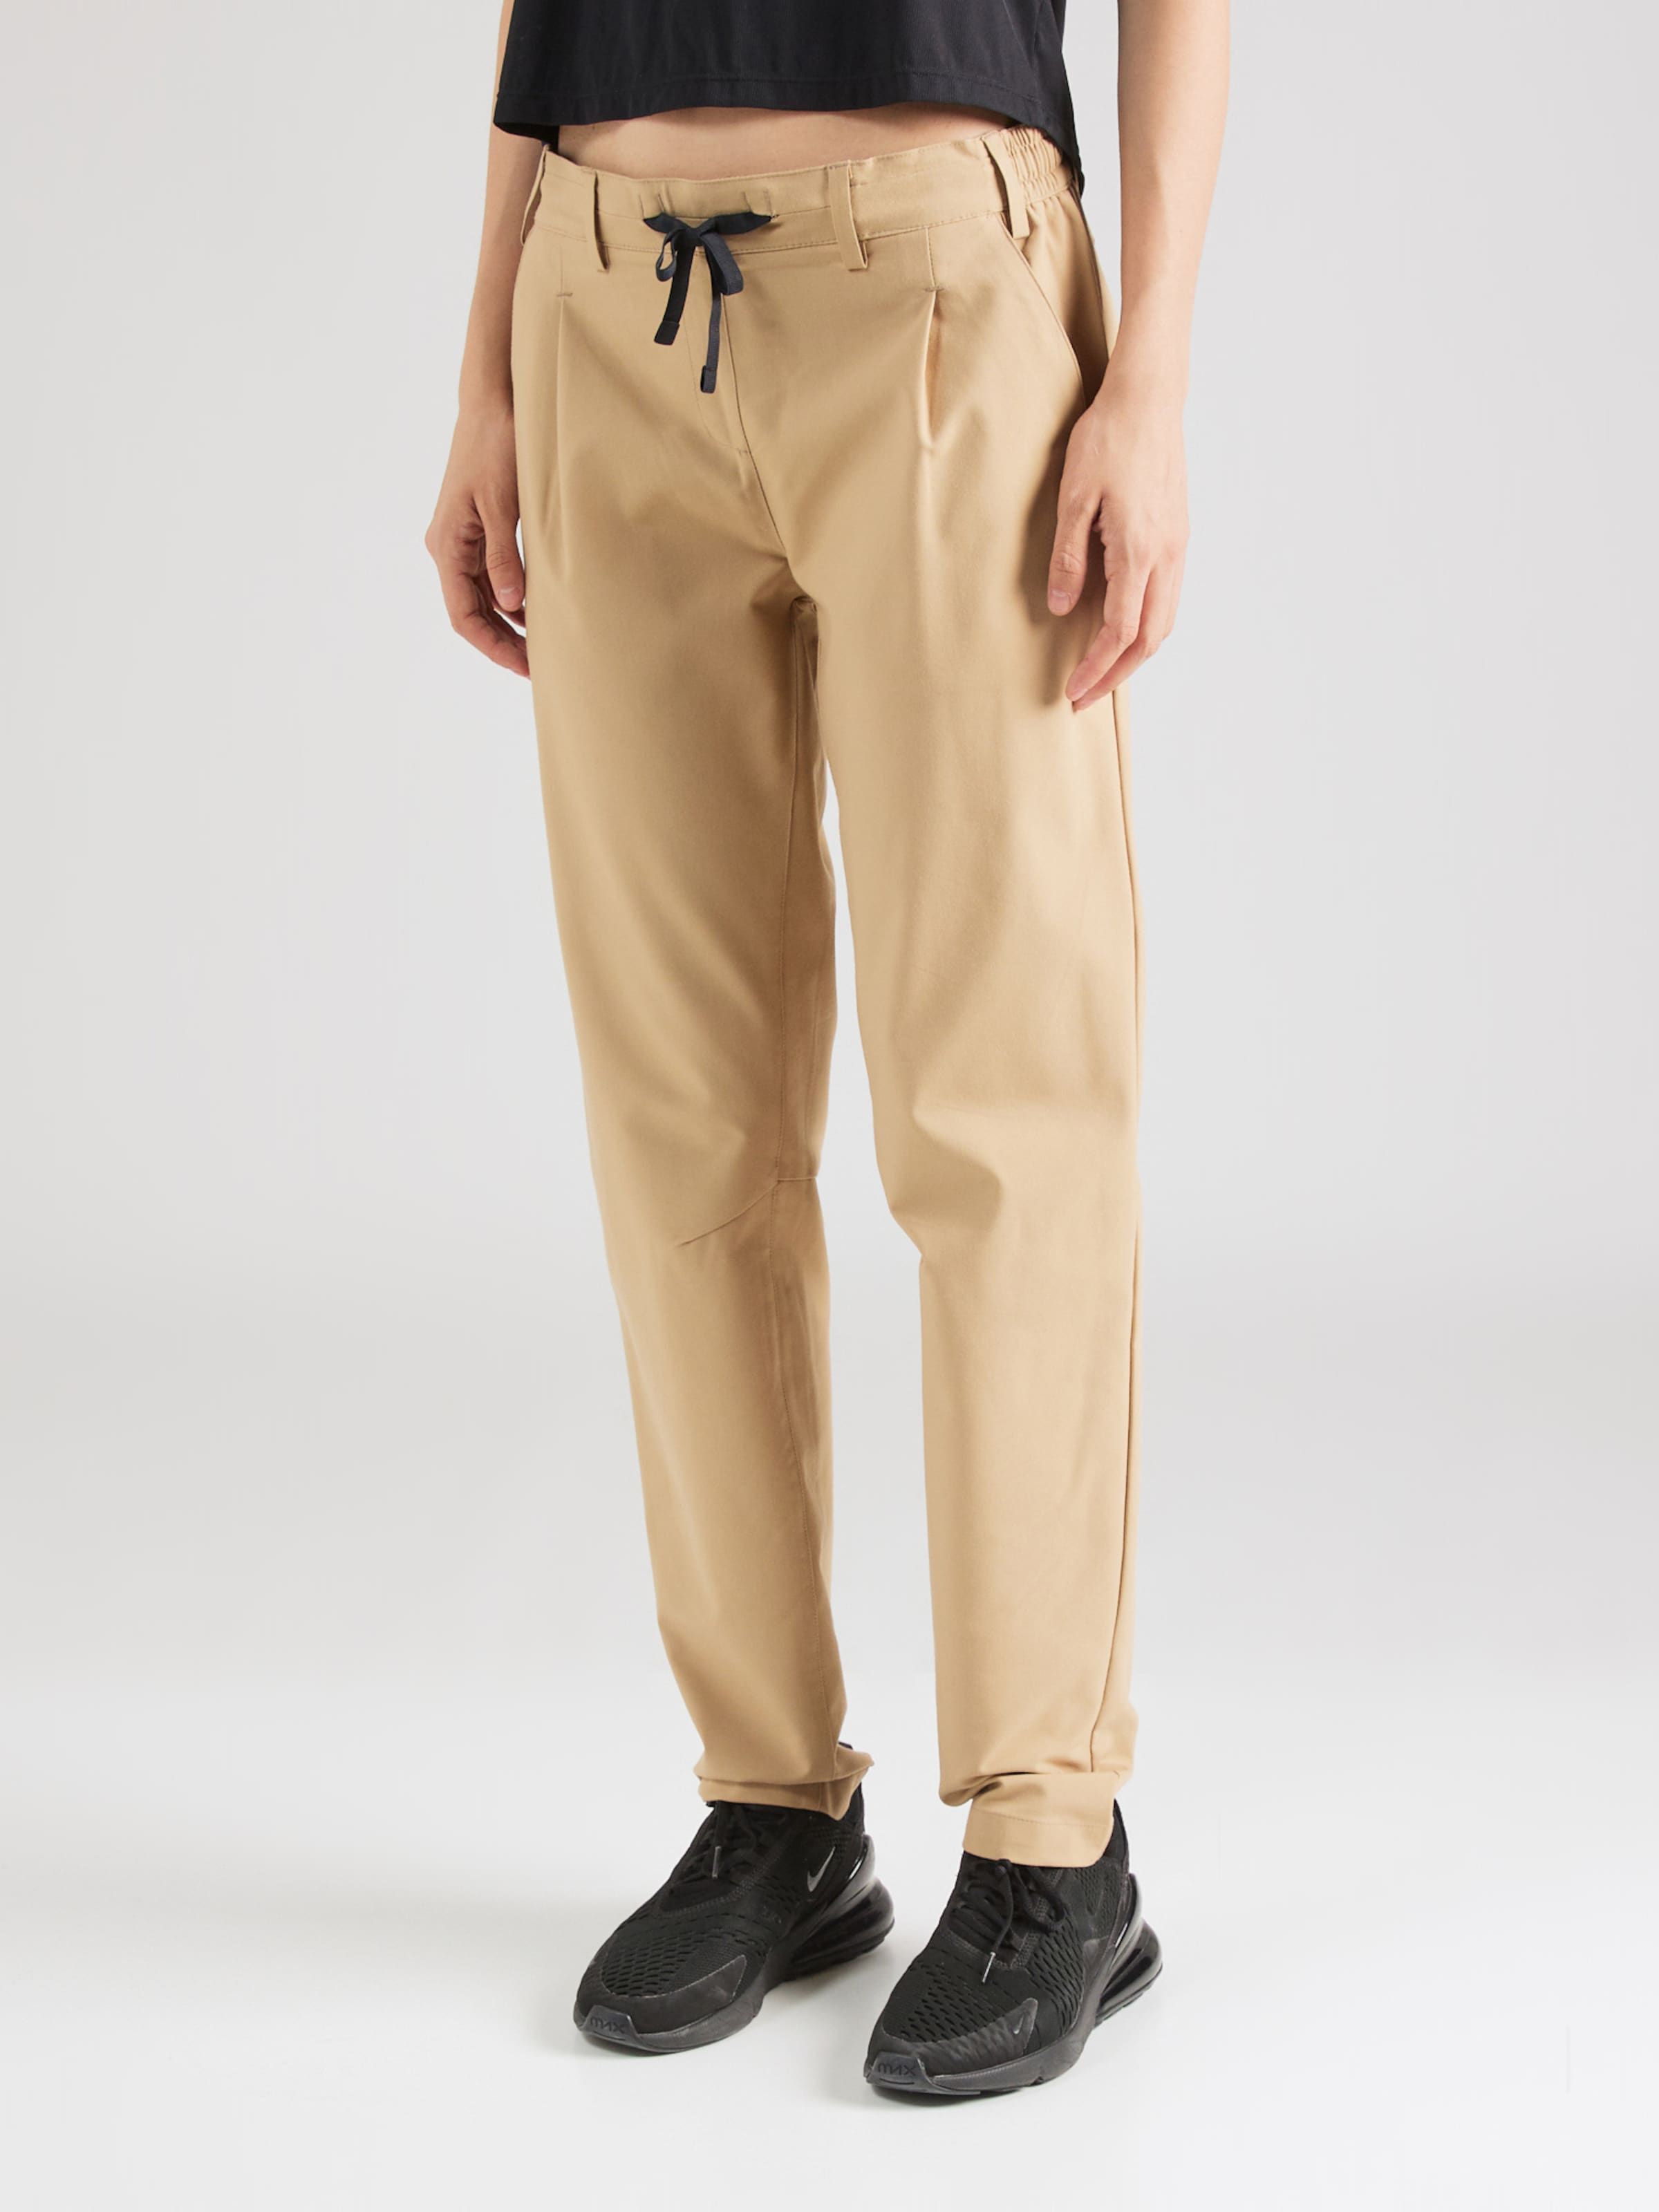 Schöffel Regular Workout Pants 'Oaktree' in Sand | ABOUT YOU